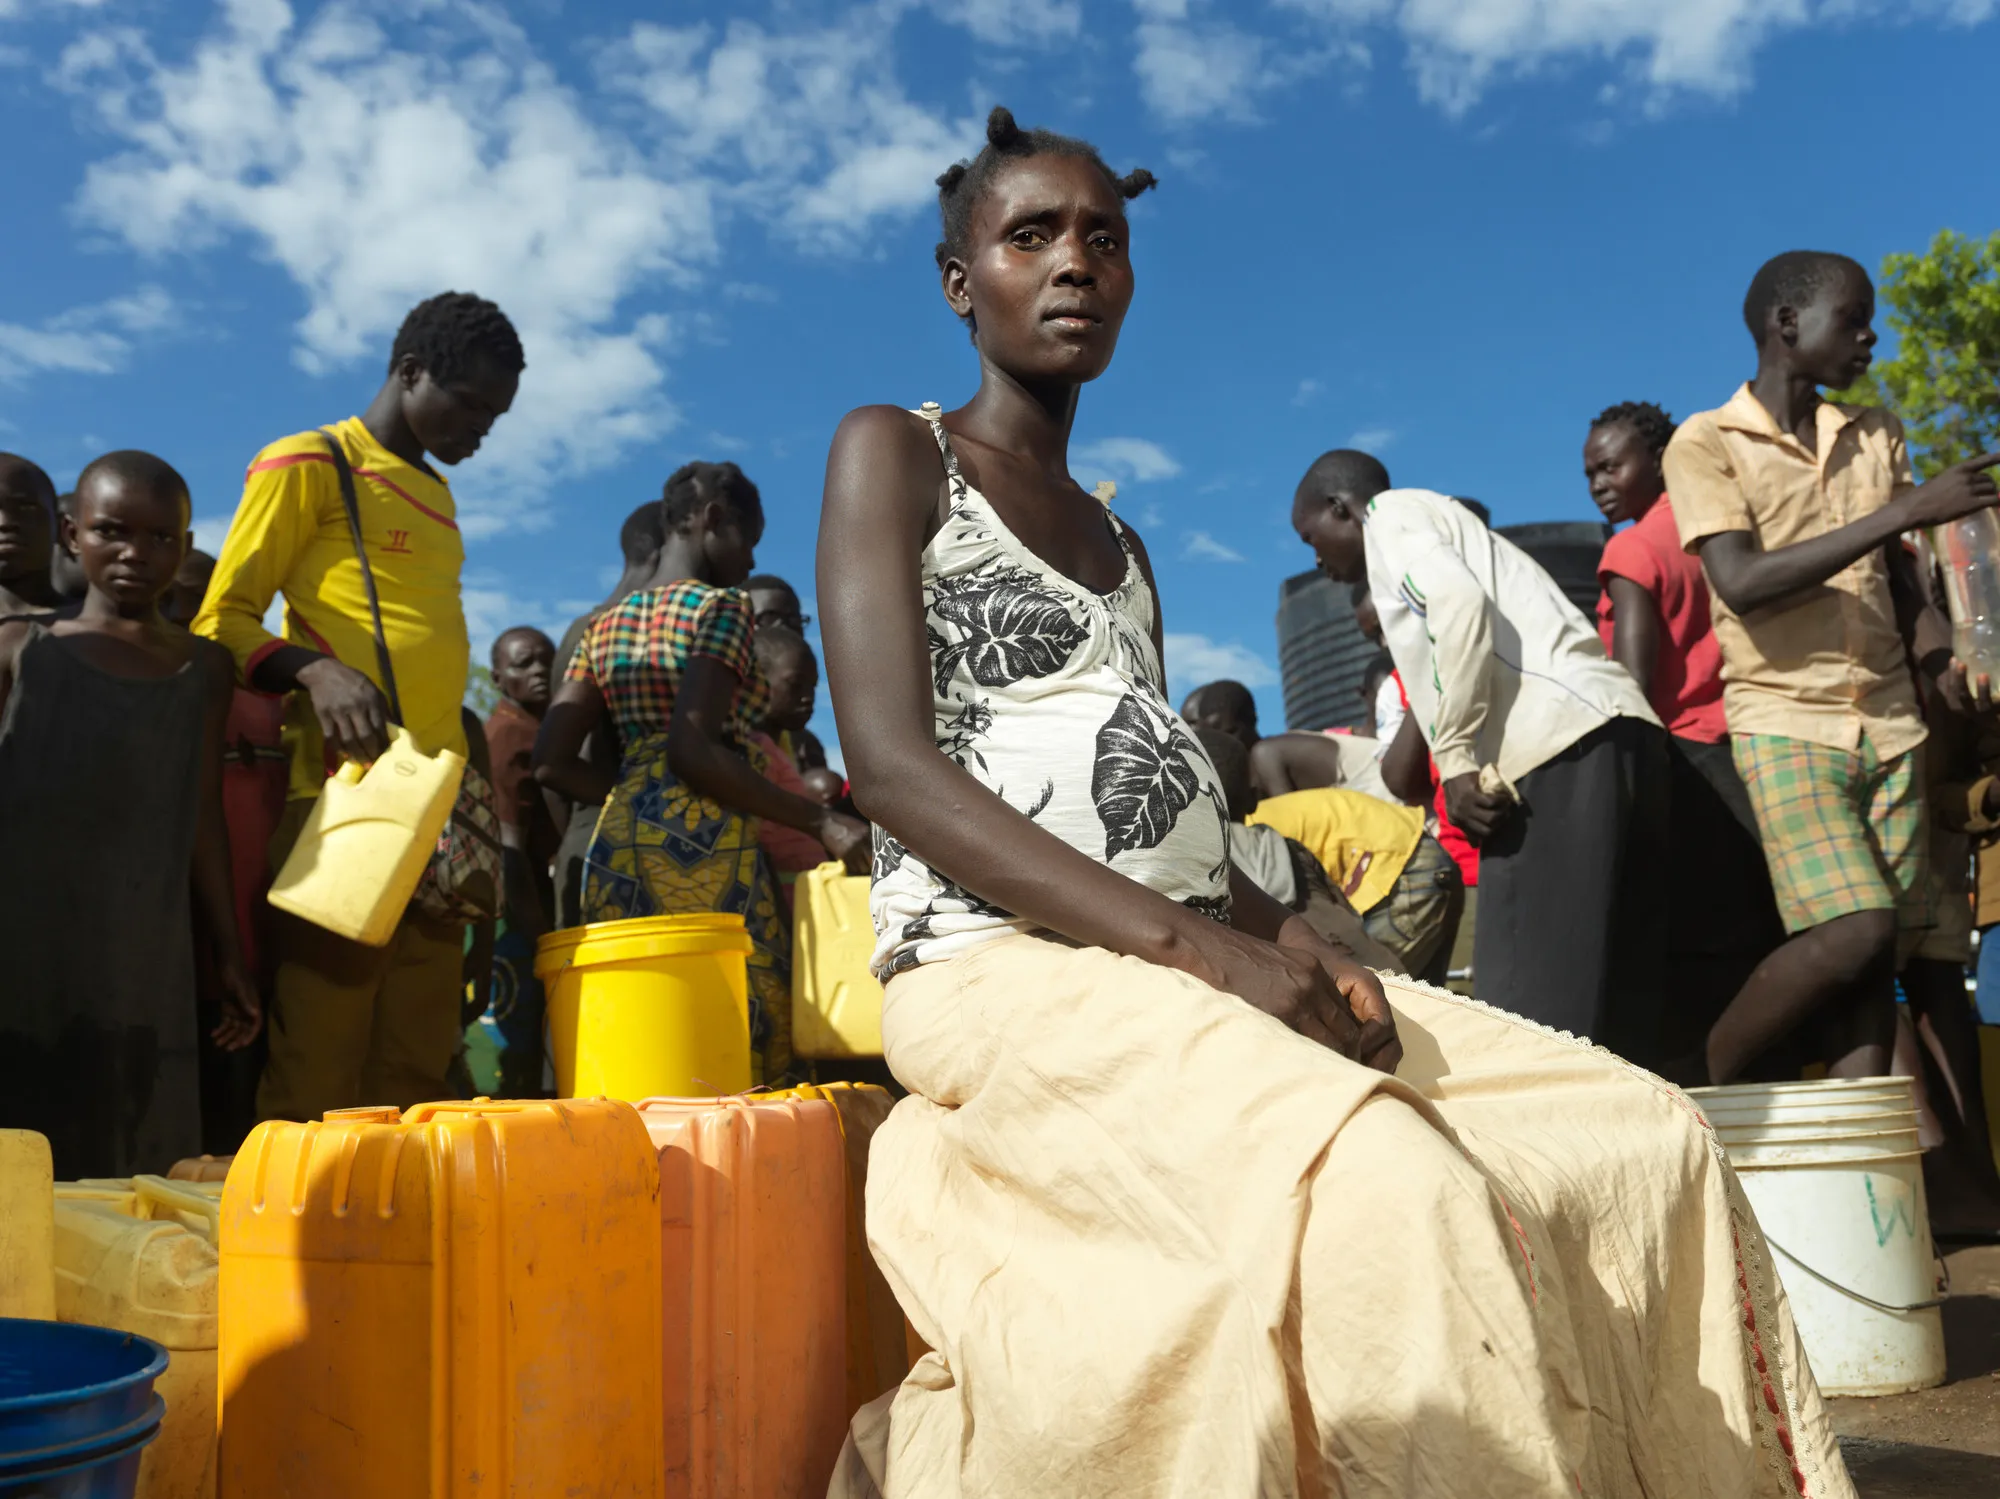 A woman sits on jerry cans in a crowd of people